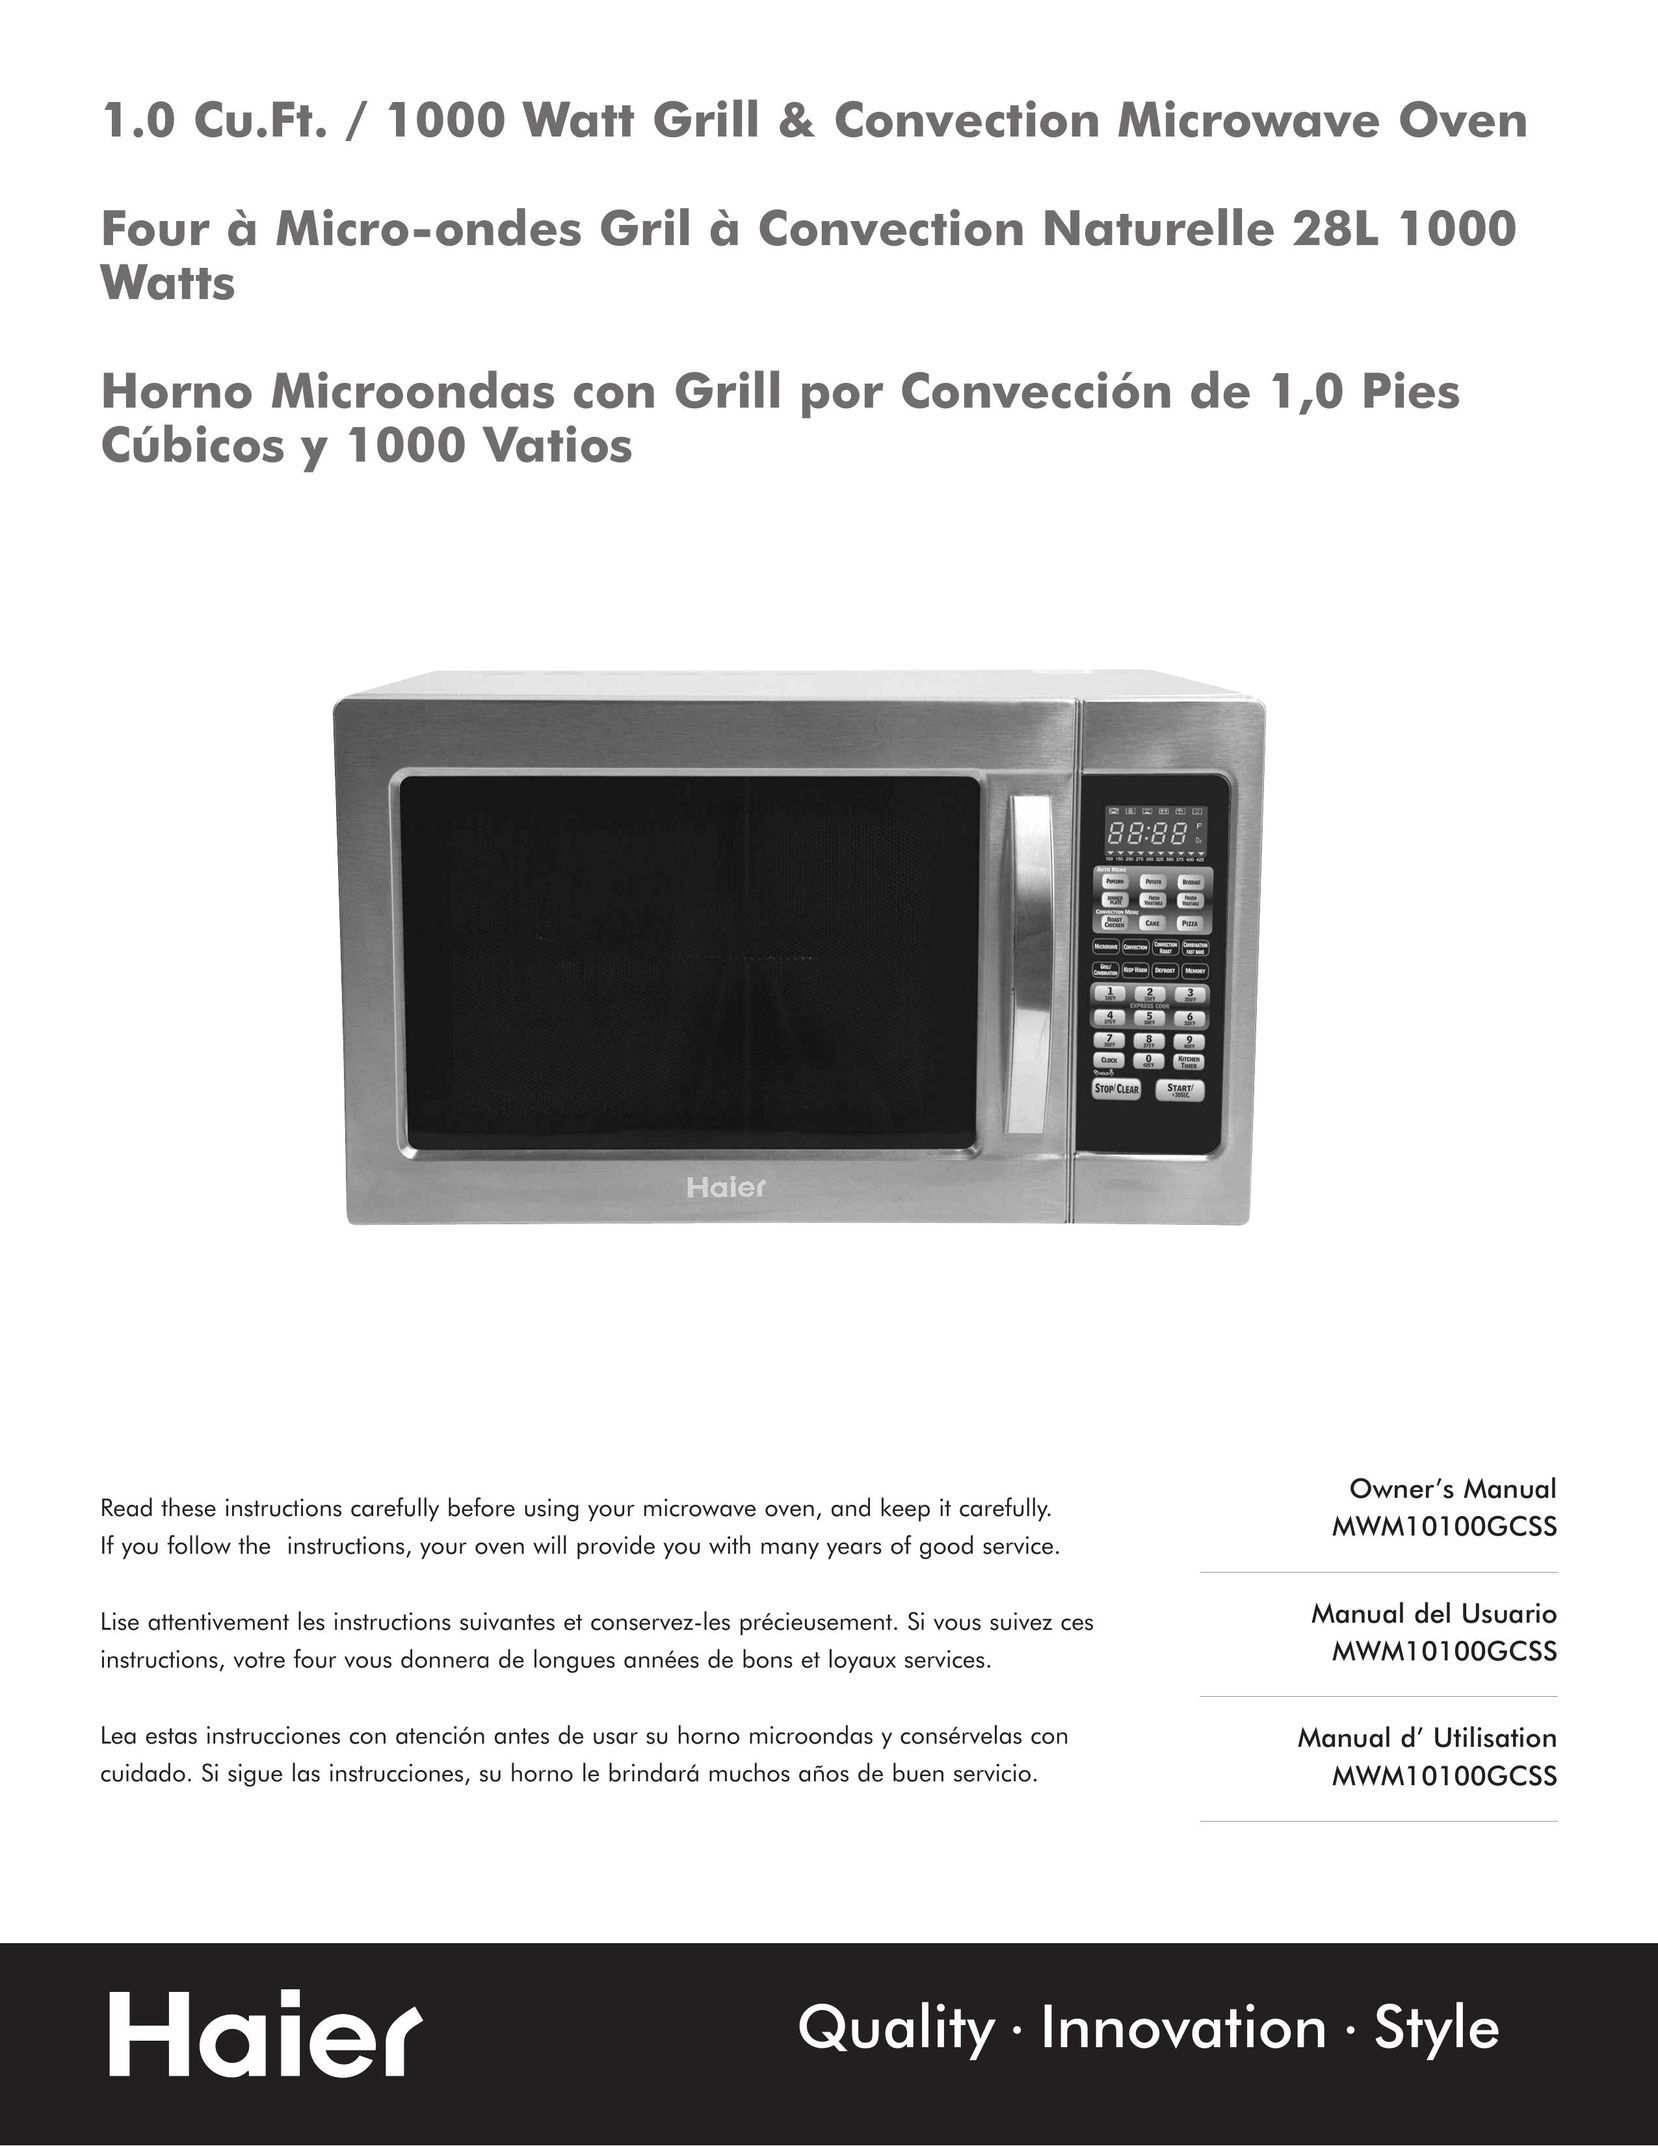 Haier MWM10100GCSS Convection Oven User Manual